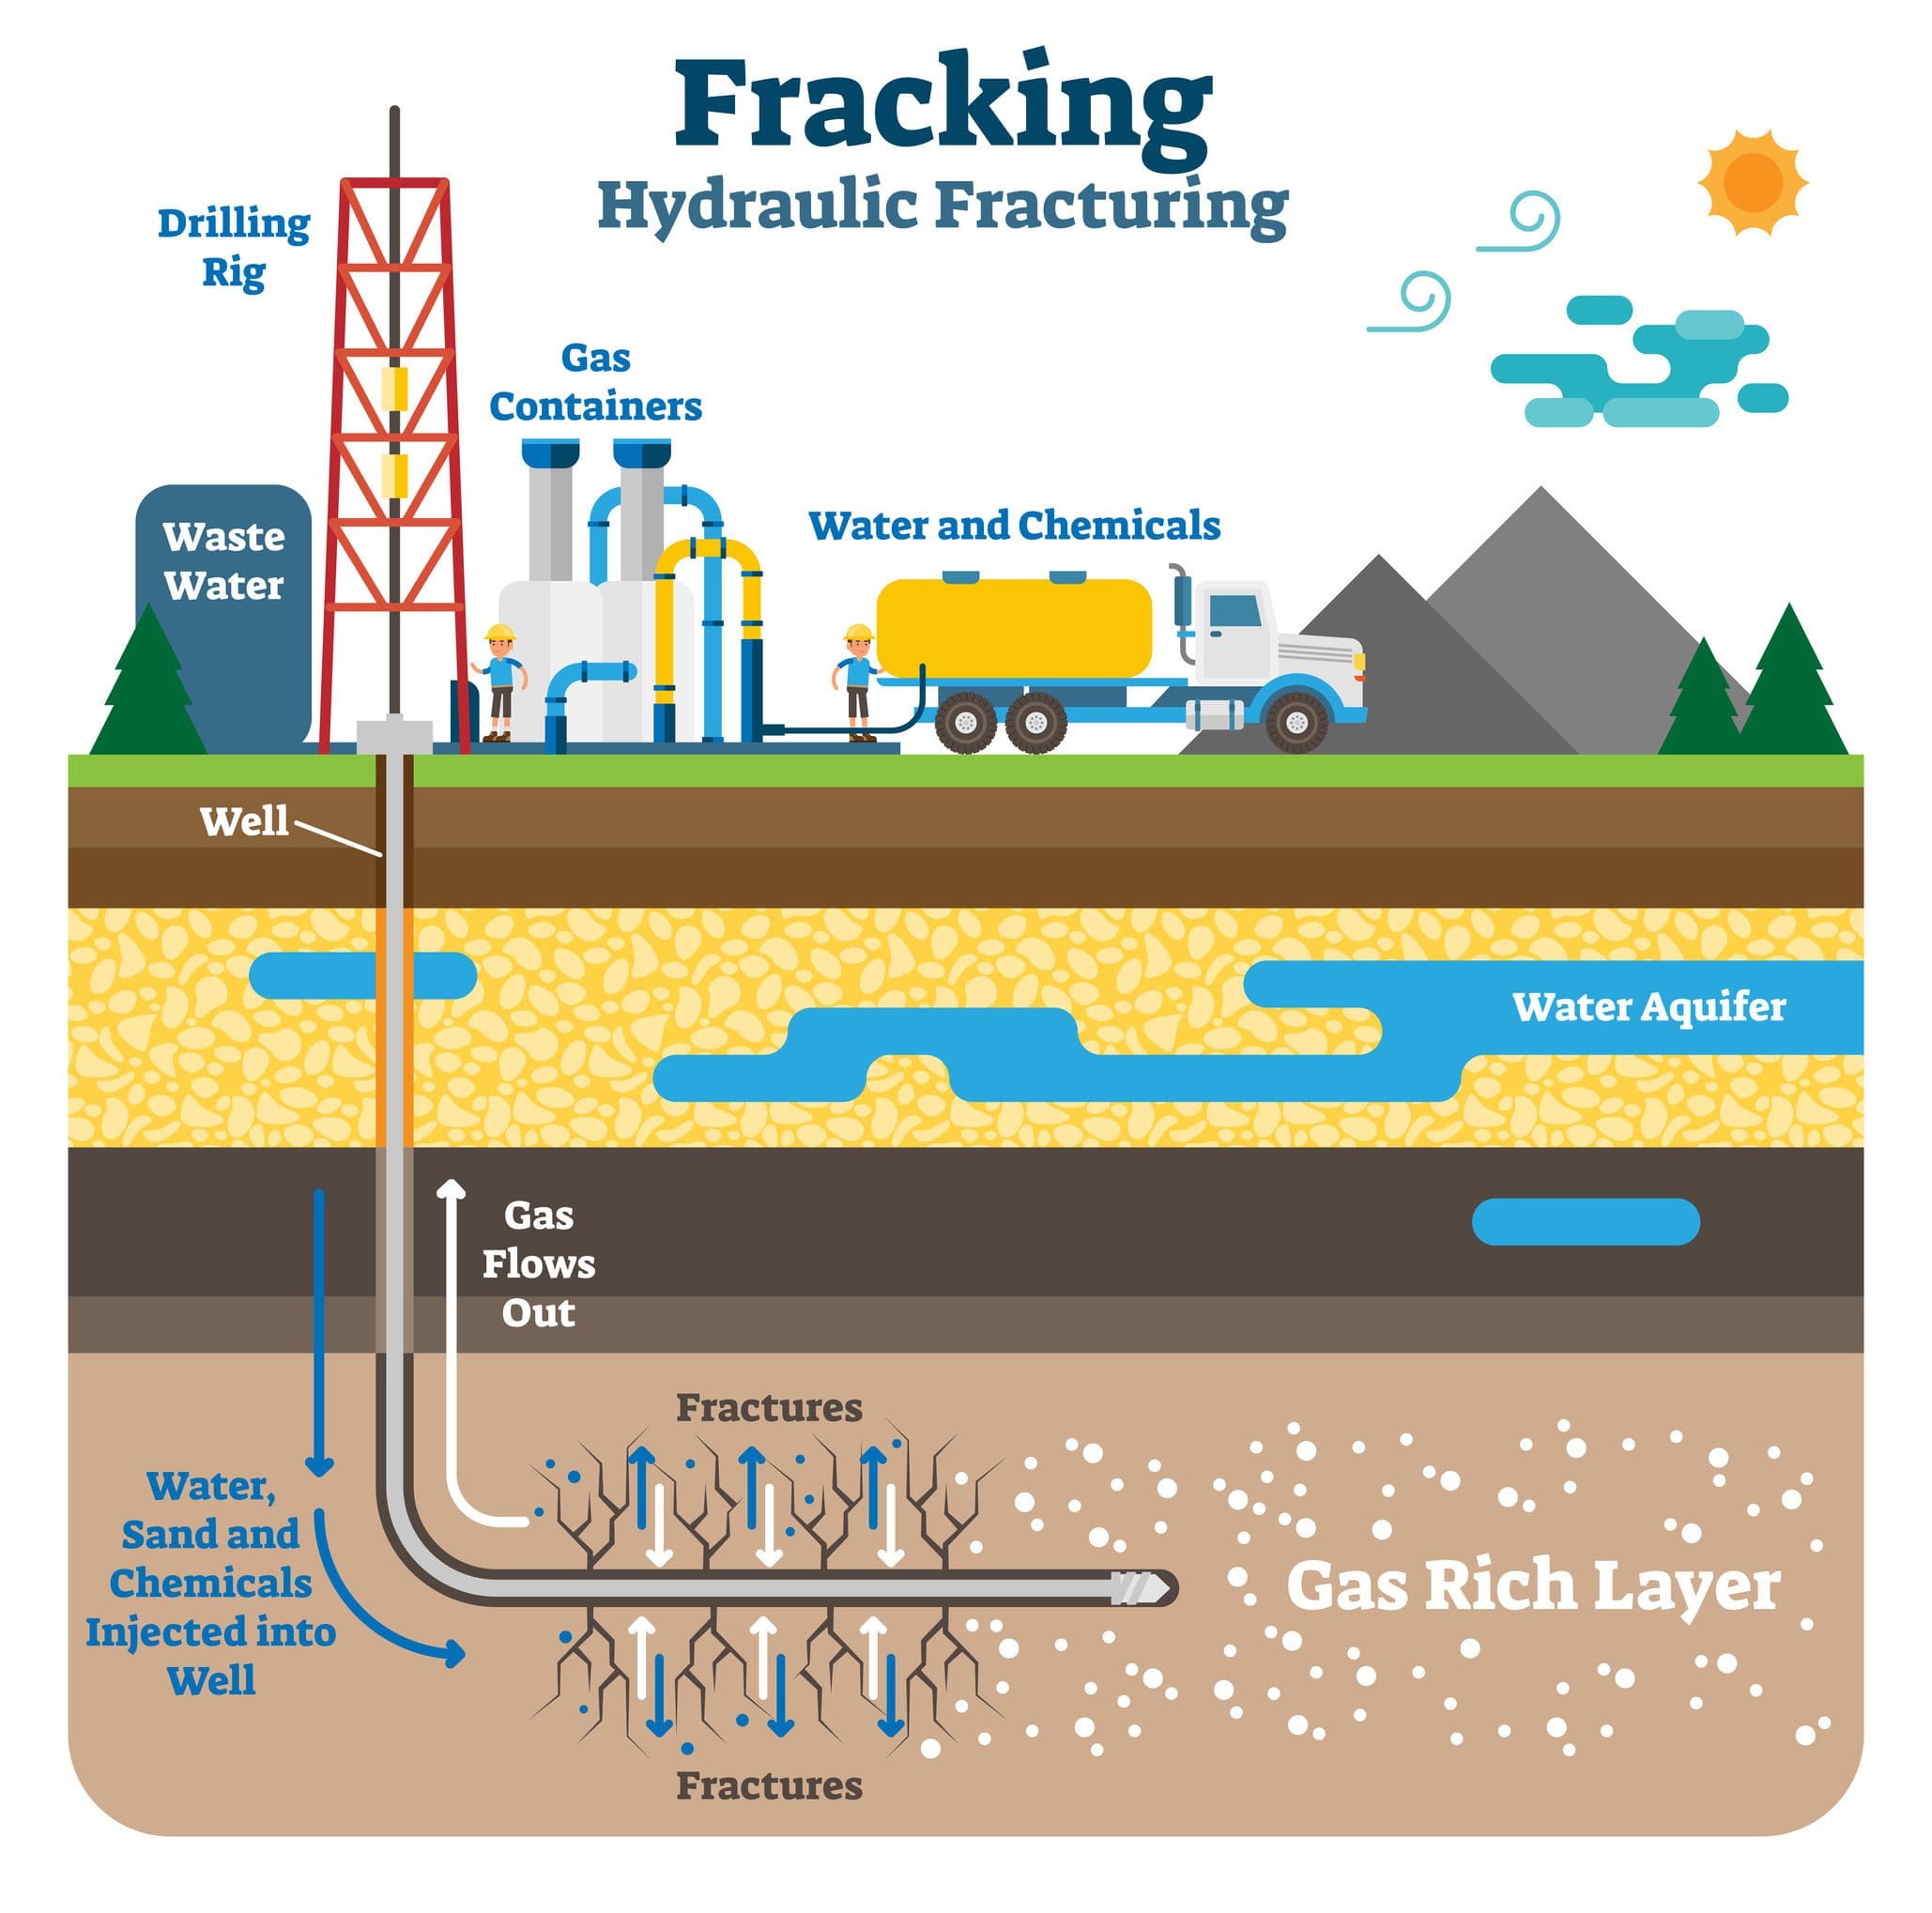 The process of fracking involves drilling a well and inserting a steel pipe into the wellbore. The casing of the steel pipe is targeted into the zones that consist of gas and oil. The fluid for fracturing is injected into the well, and this is when the targeted area will not be able to absorb as much fluid as it is being injected. When this becomes the case, then the targeted formation begins to fracture or crack.